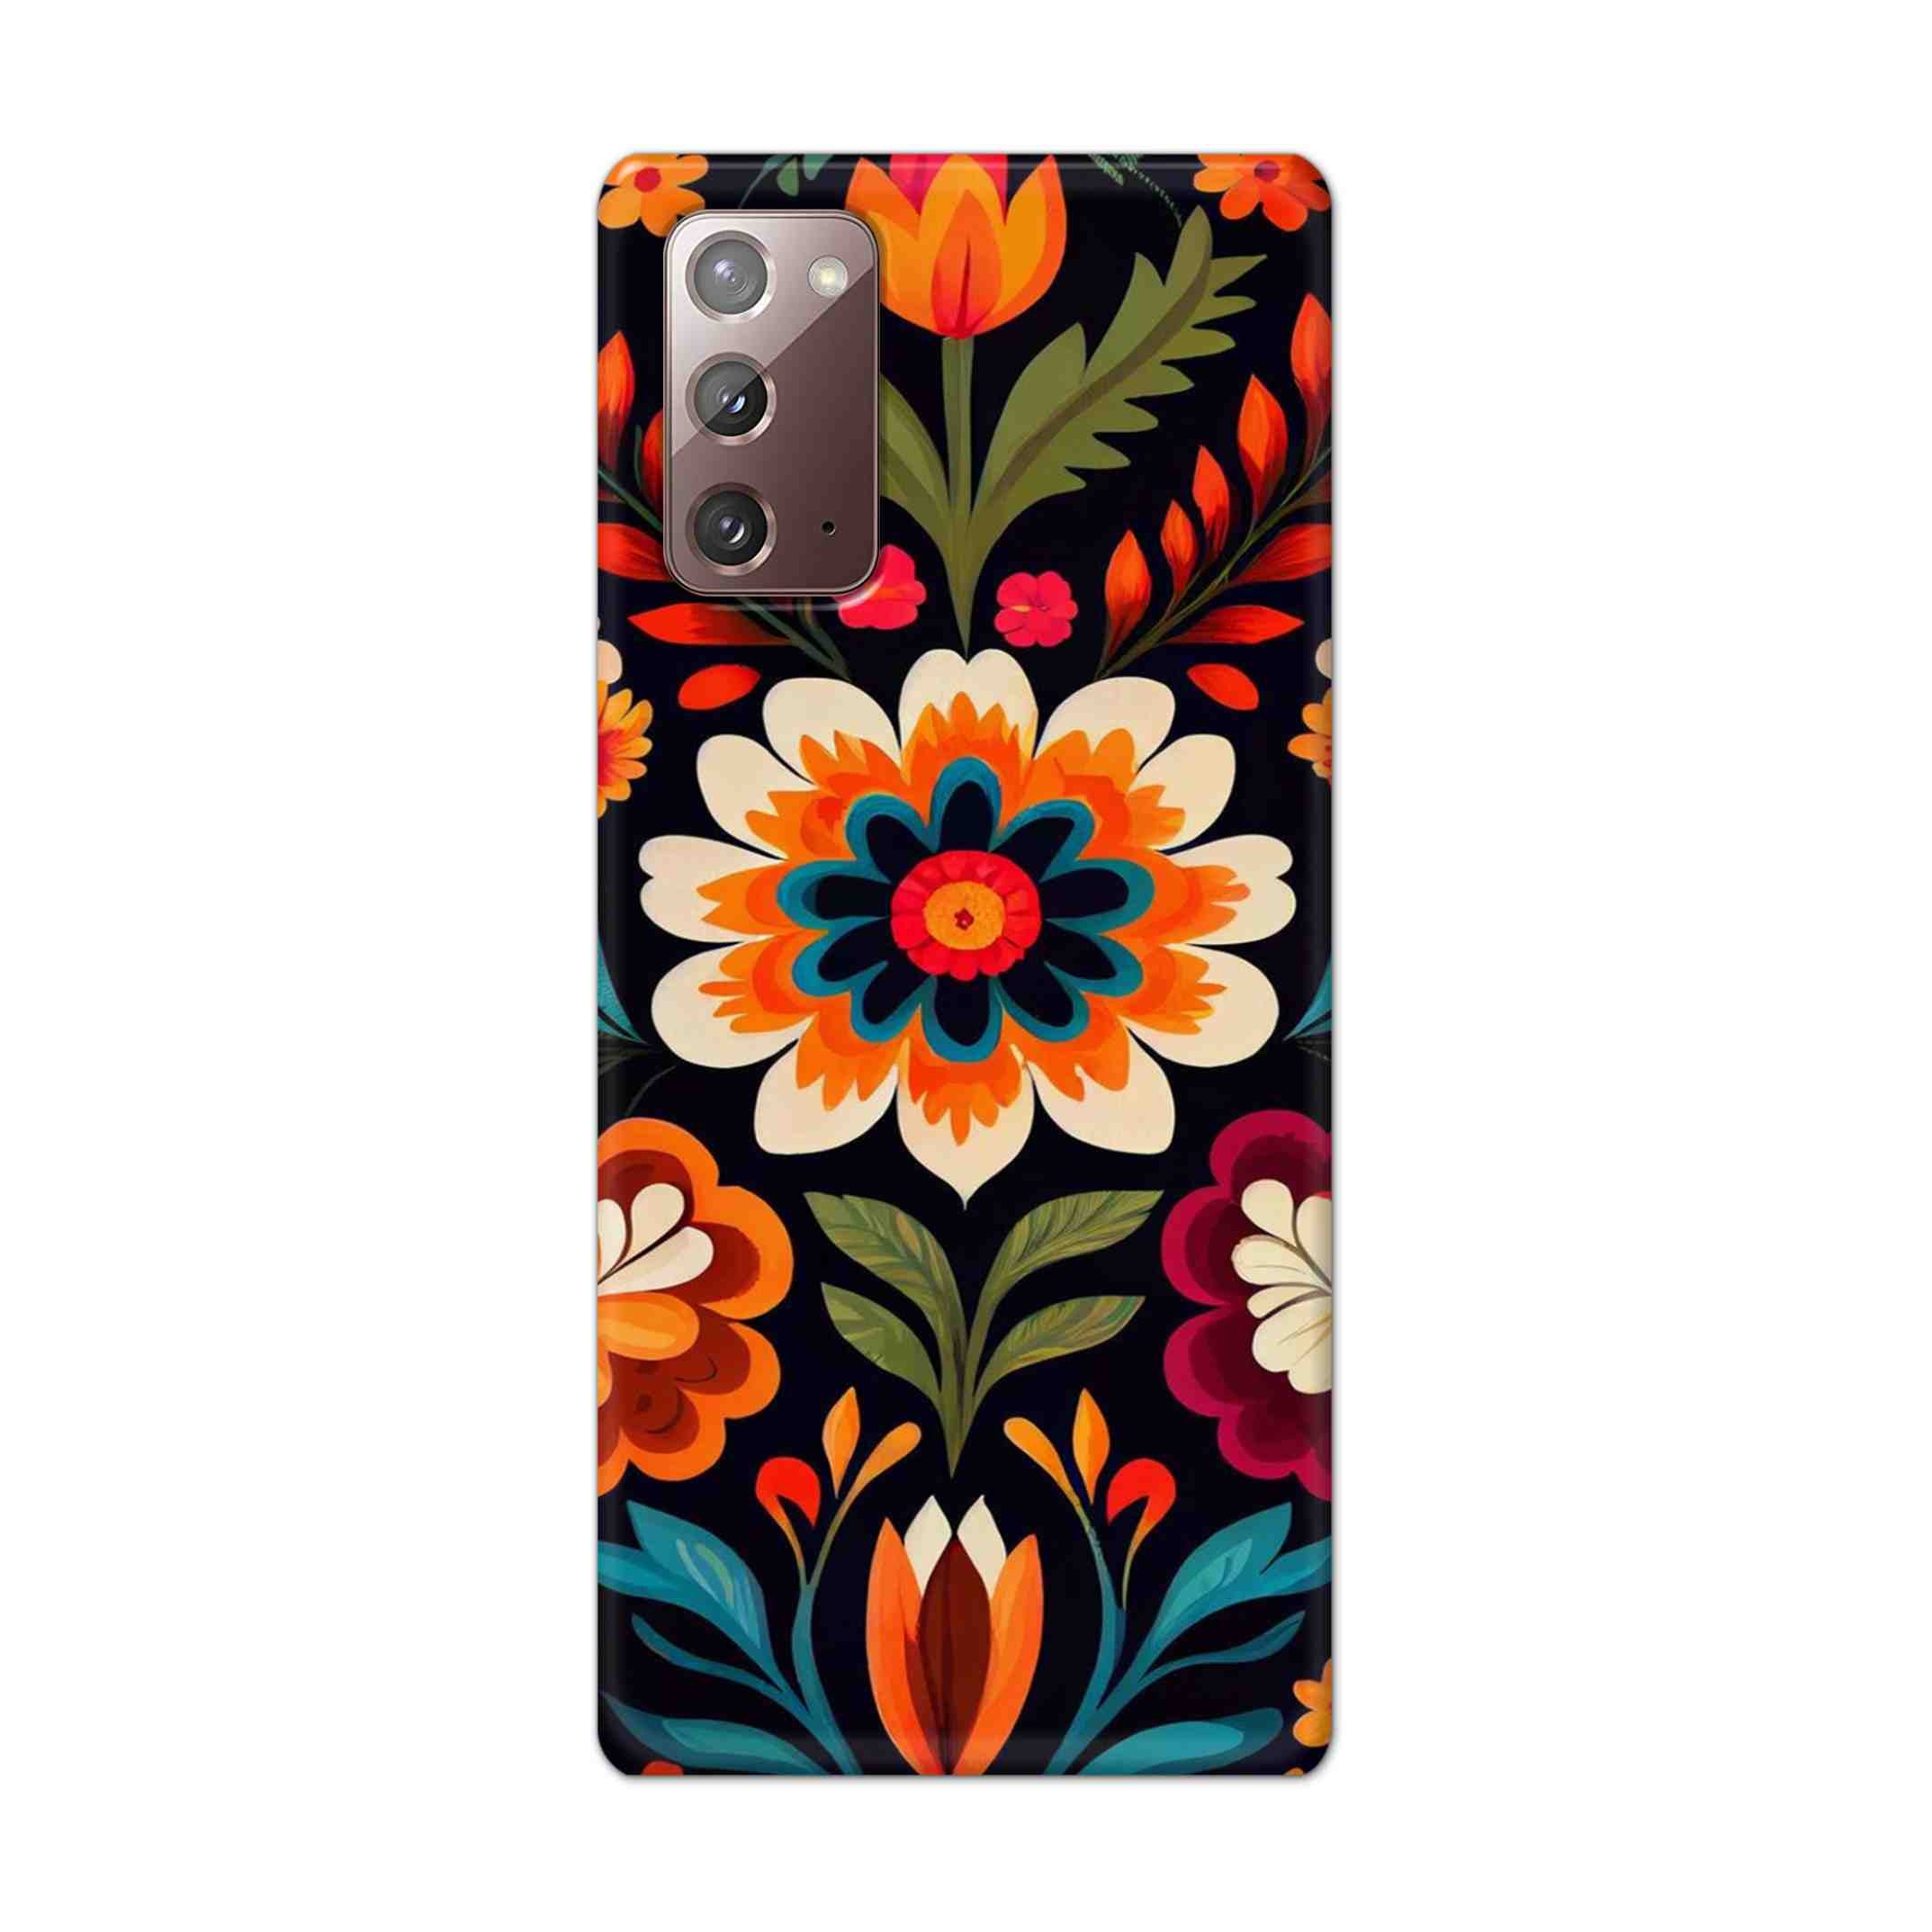 Buy Flower Hard Back Mobile Phone Case Cover For Samsung Galaxy Note 20 Online